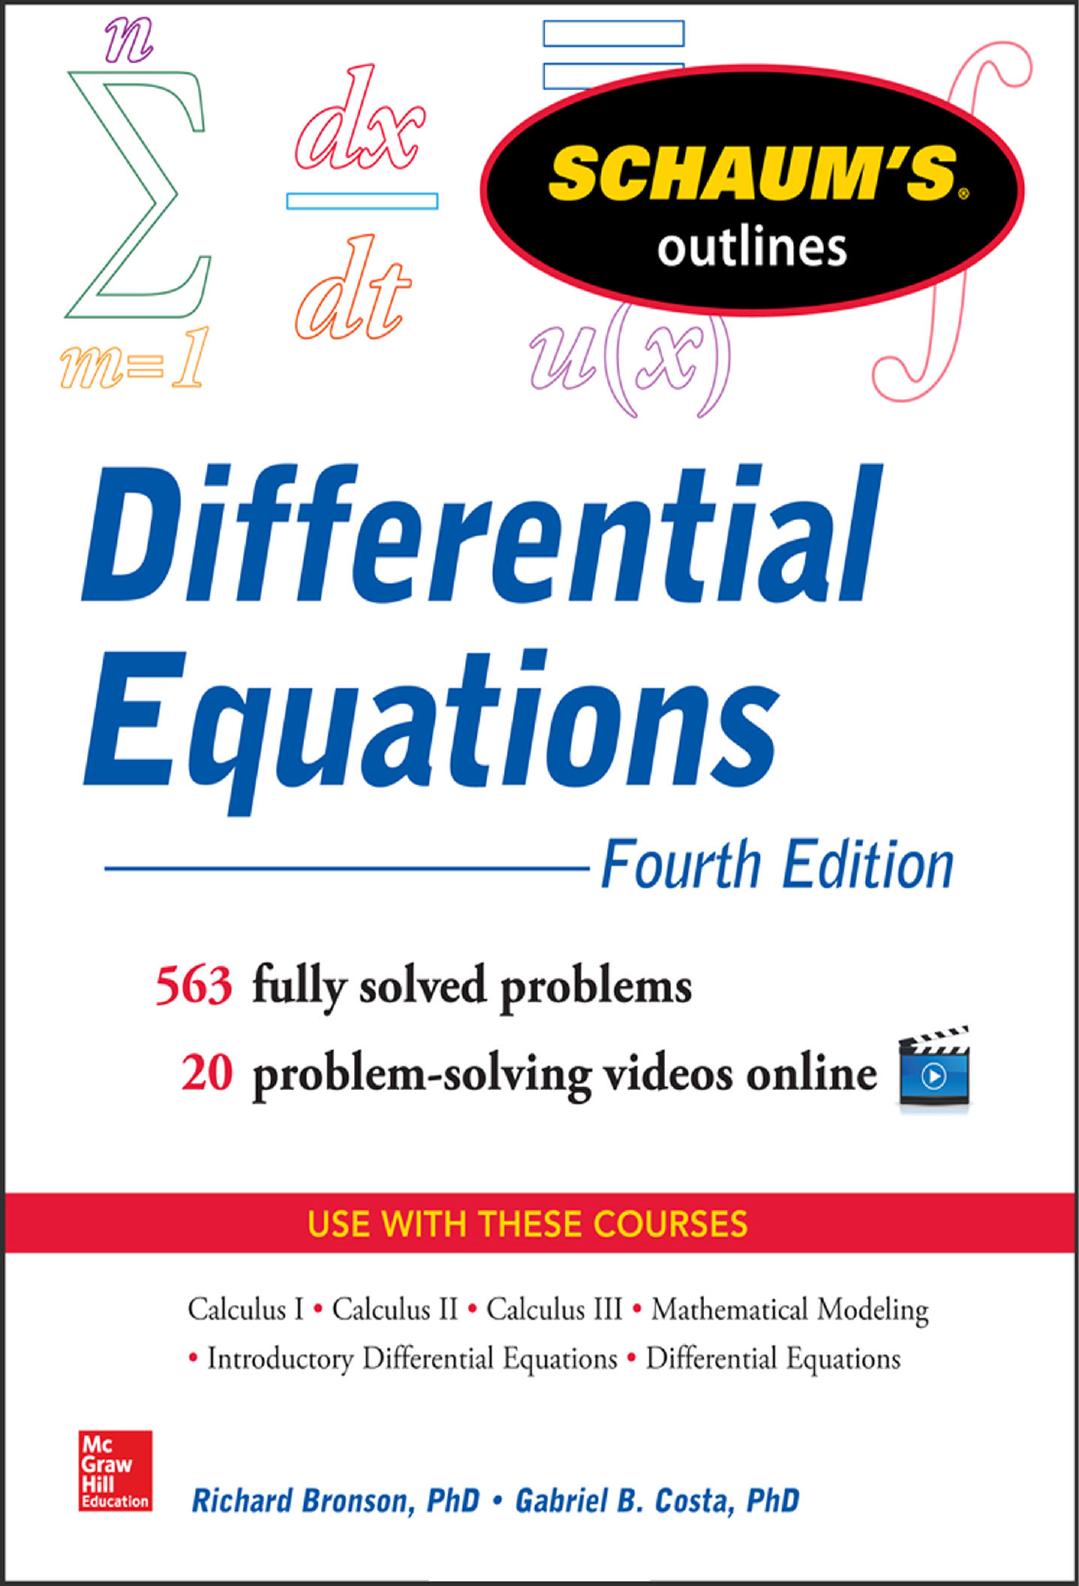 (eBook PDF)Schaum s Outlines of Differential Equations, 4th Edition by Richard Bronson